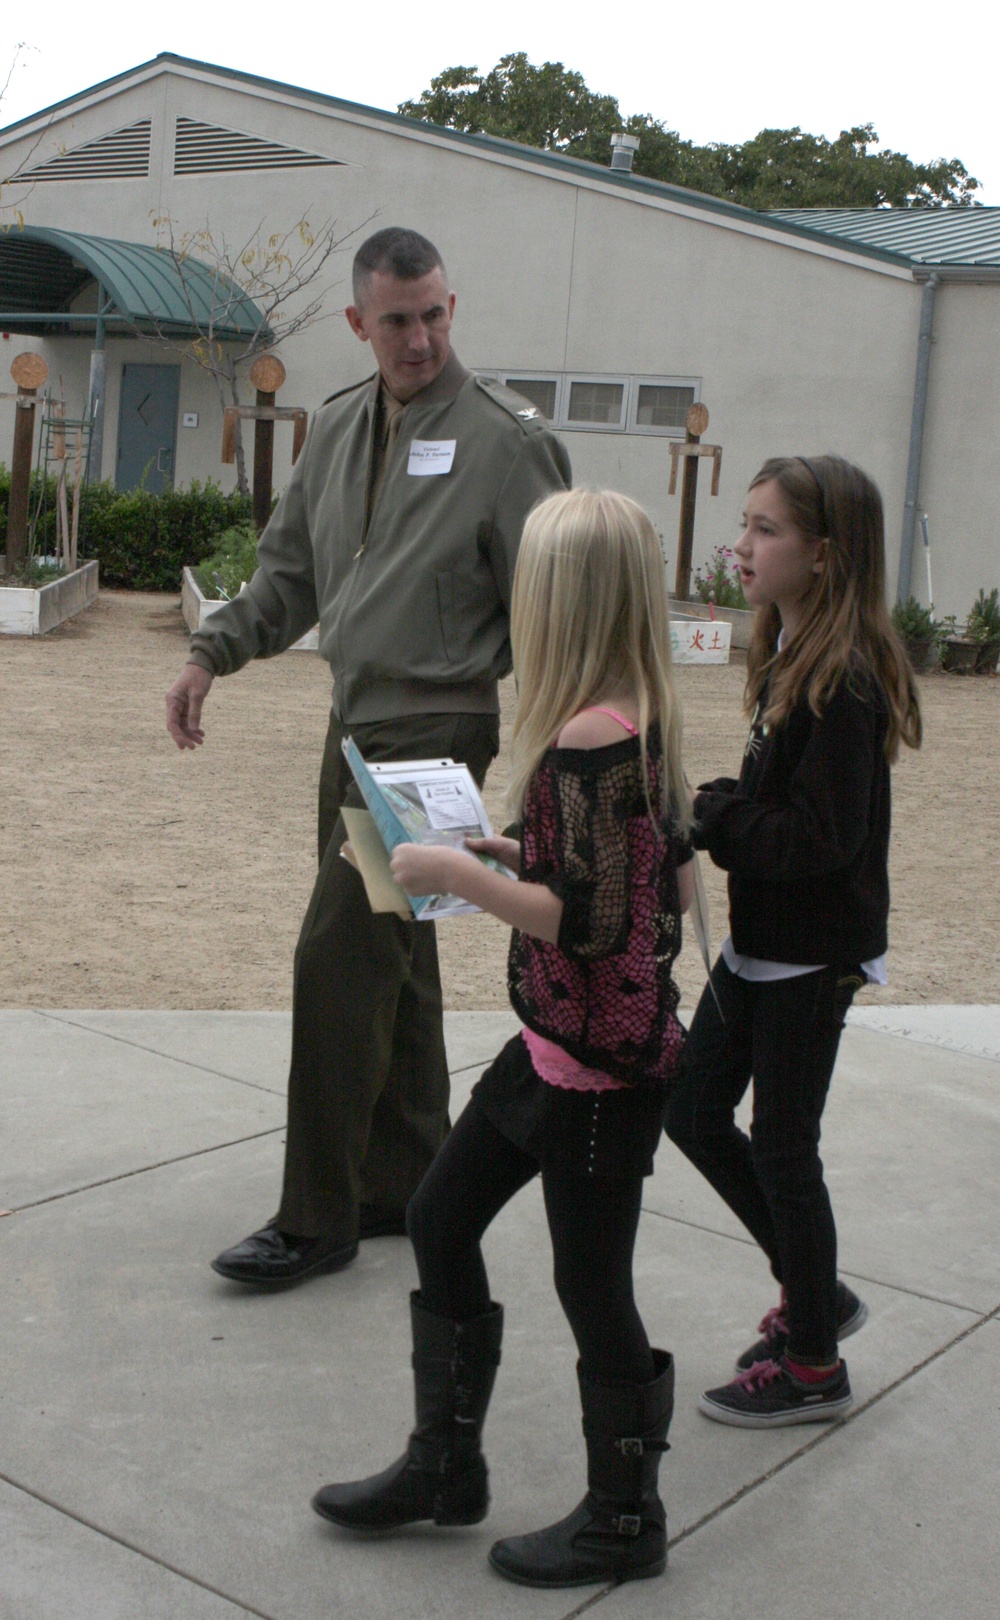 Station CO is ‘Educator for a Day’